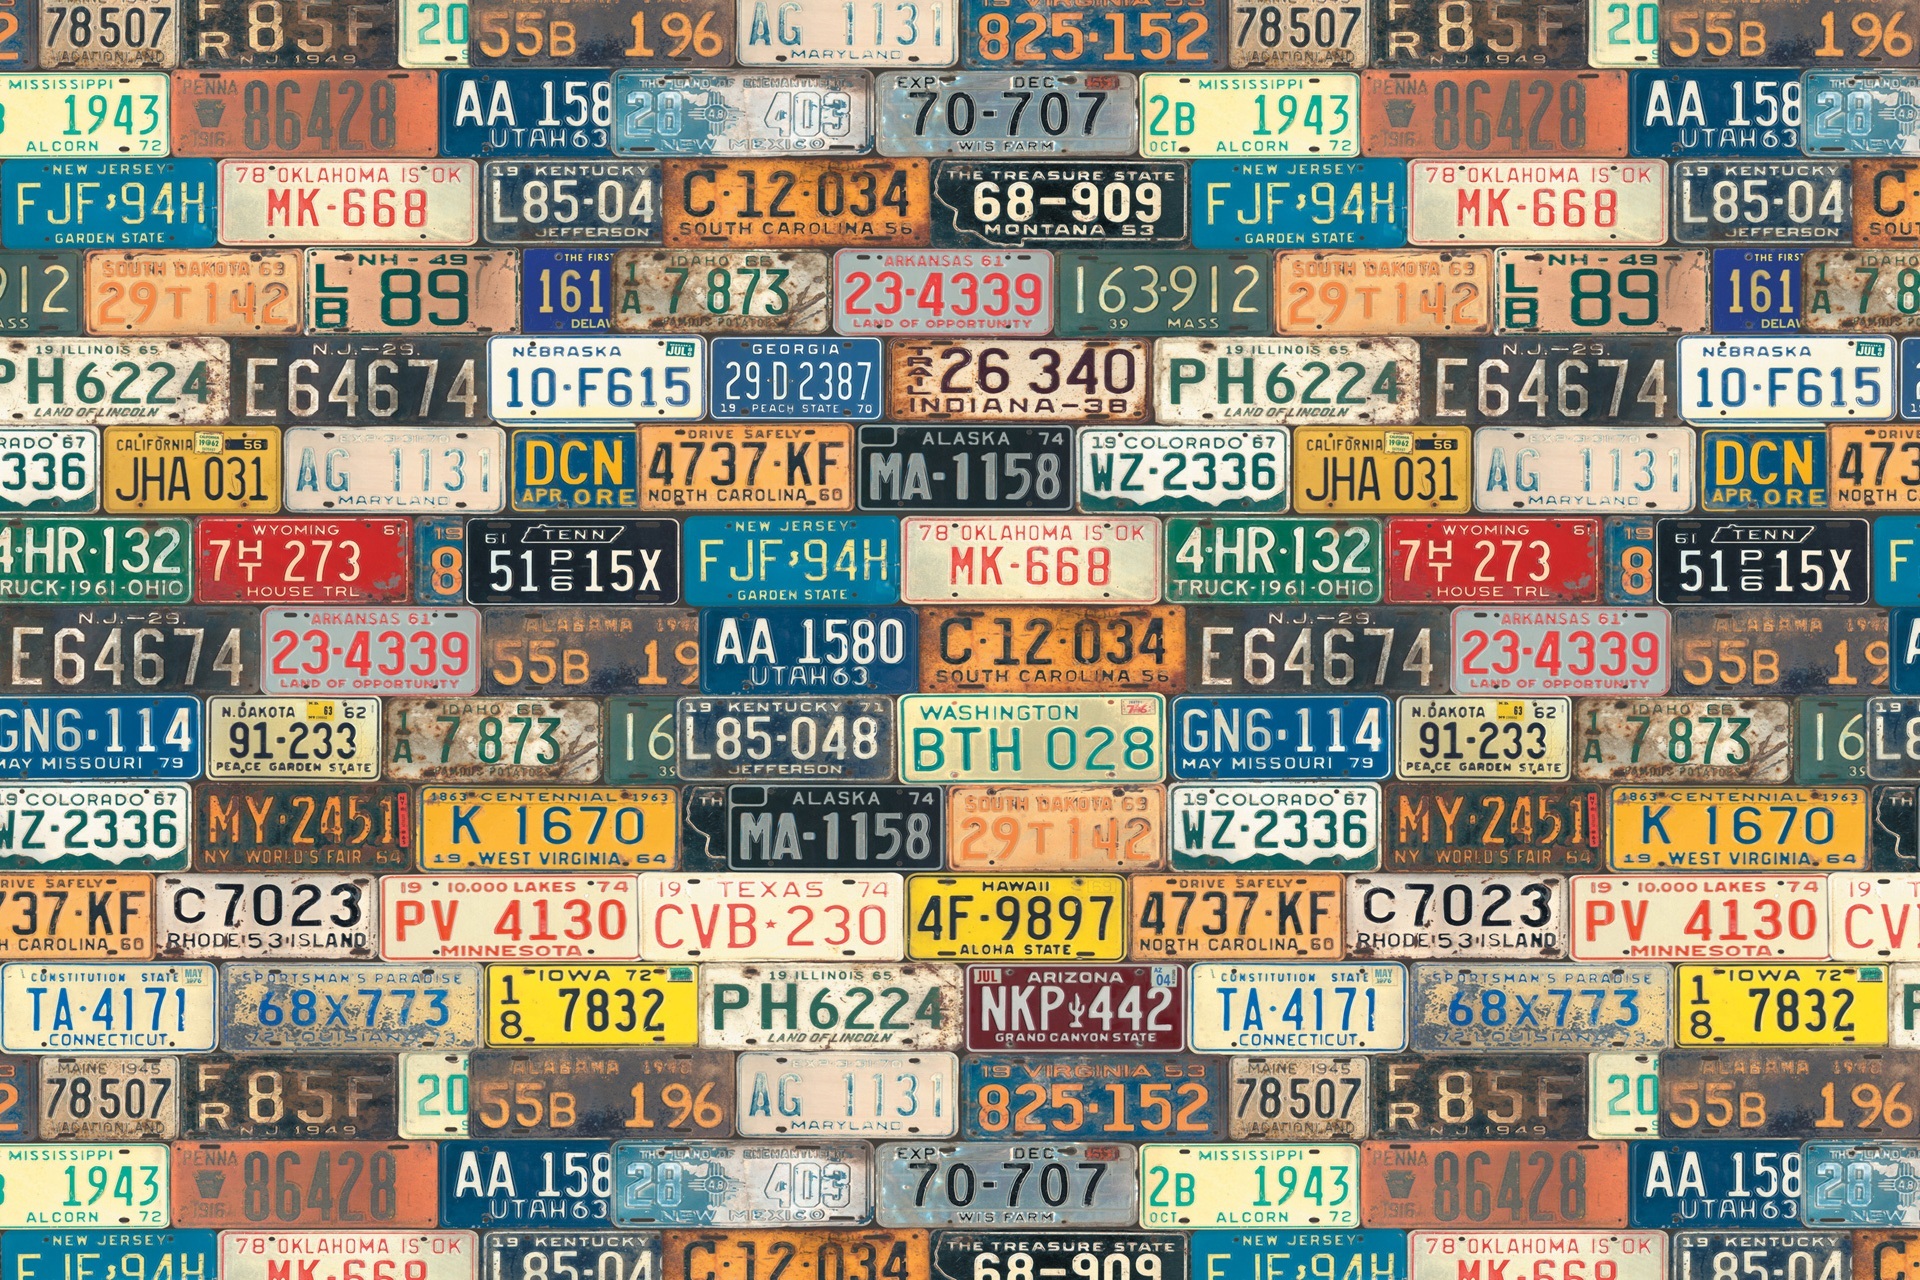 man made, license plate, license, number, plate for android